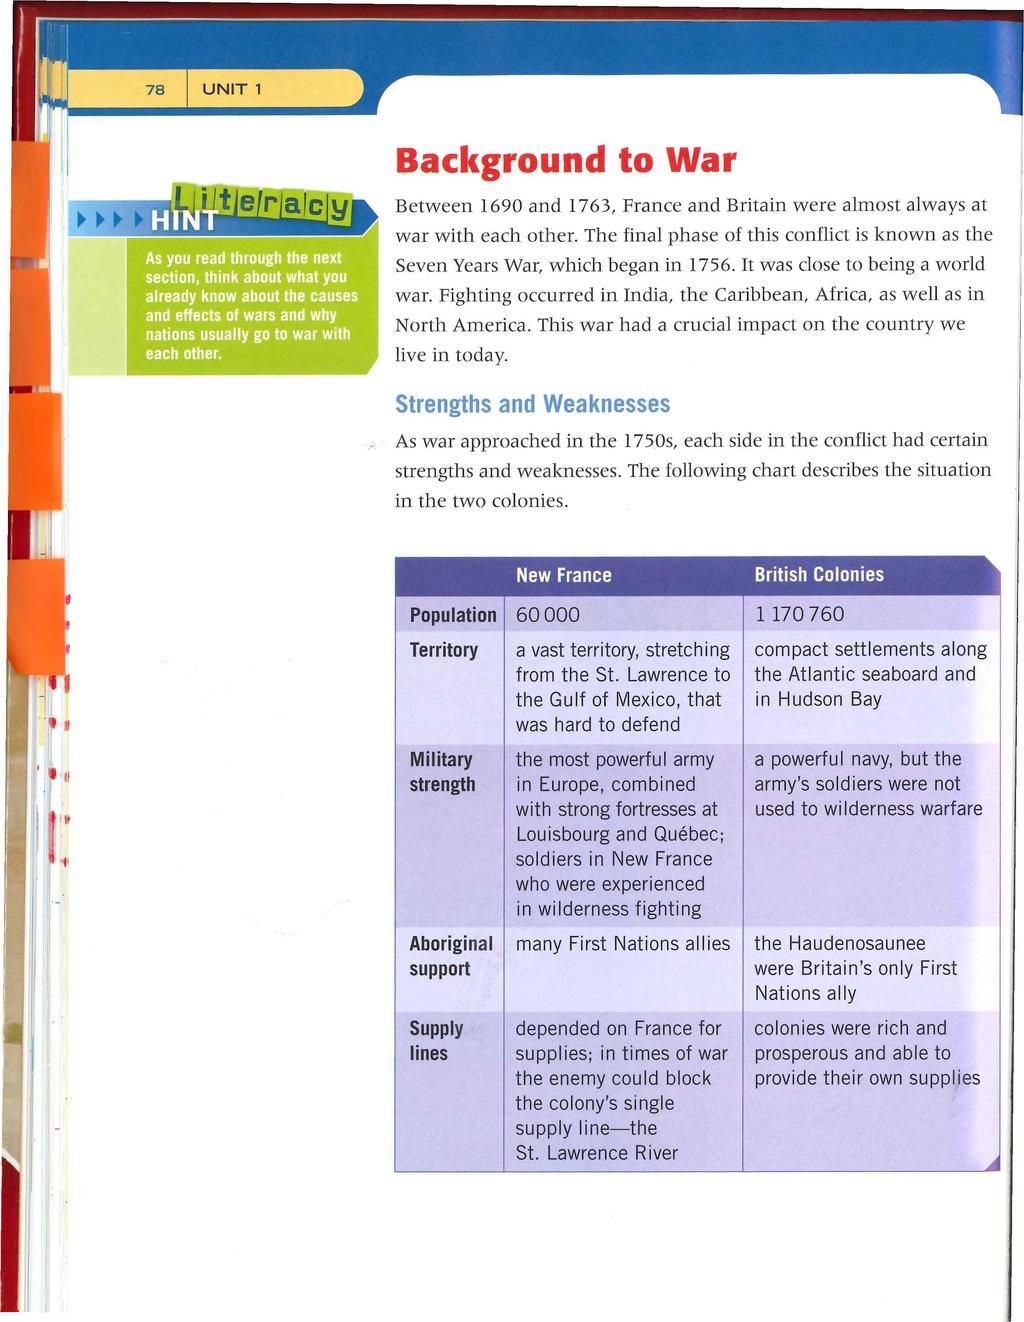 UNIT 1 As you read through the next section, think about what you already know about the causes and effects of wars and why nations usually go to war with each other.